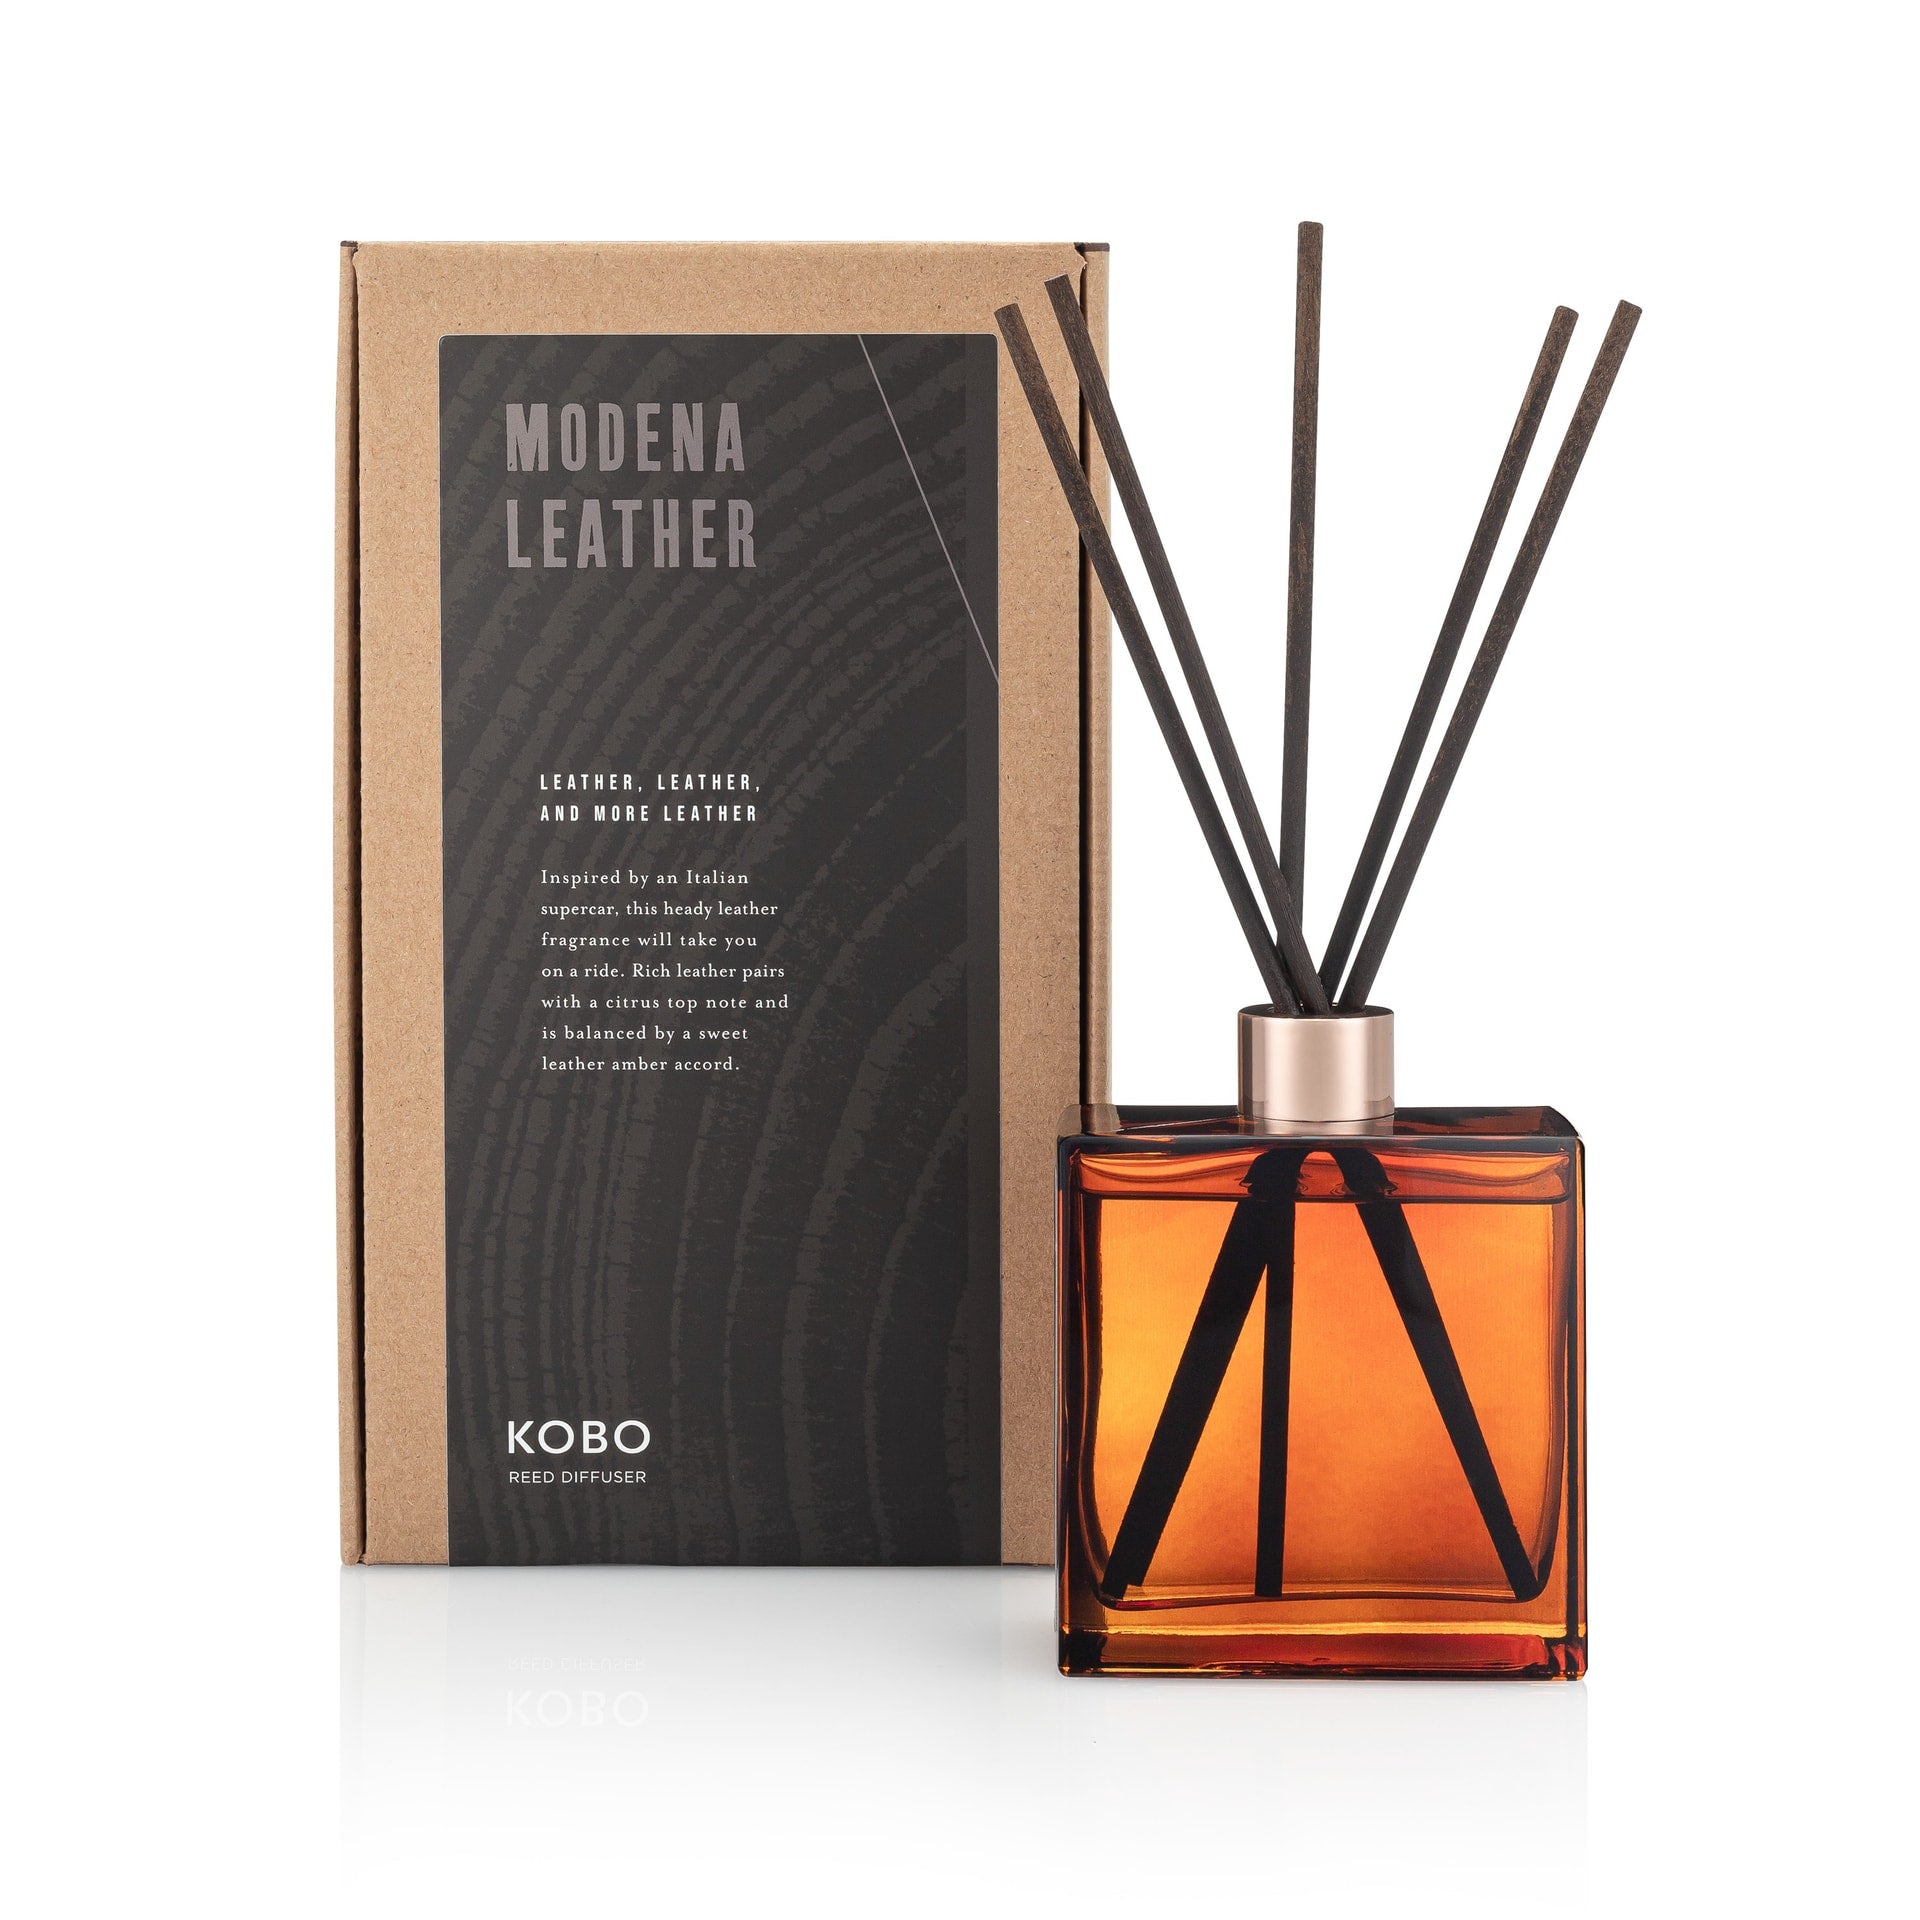 Primary Image of Modena Leather Woodblock 9 oz Room Diffuser